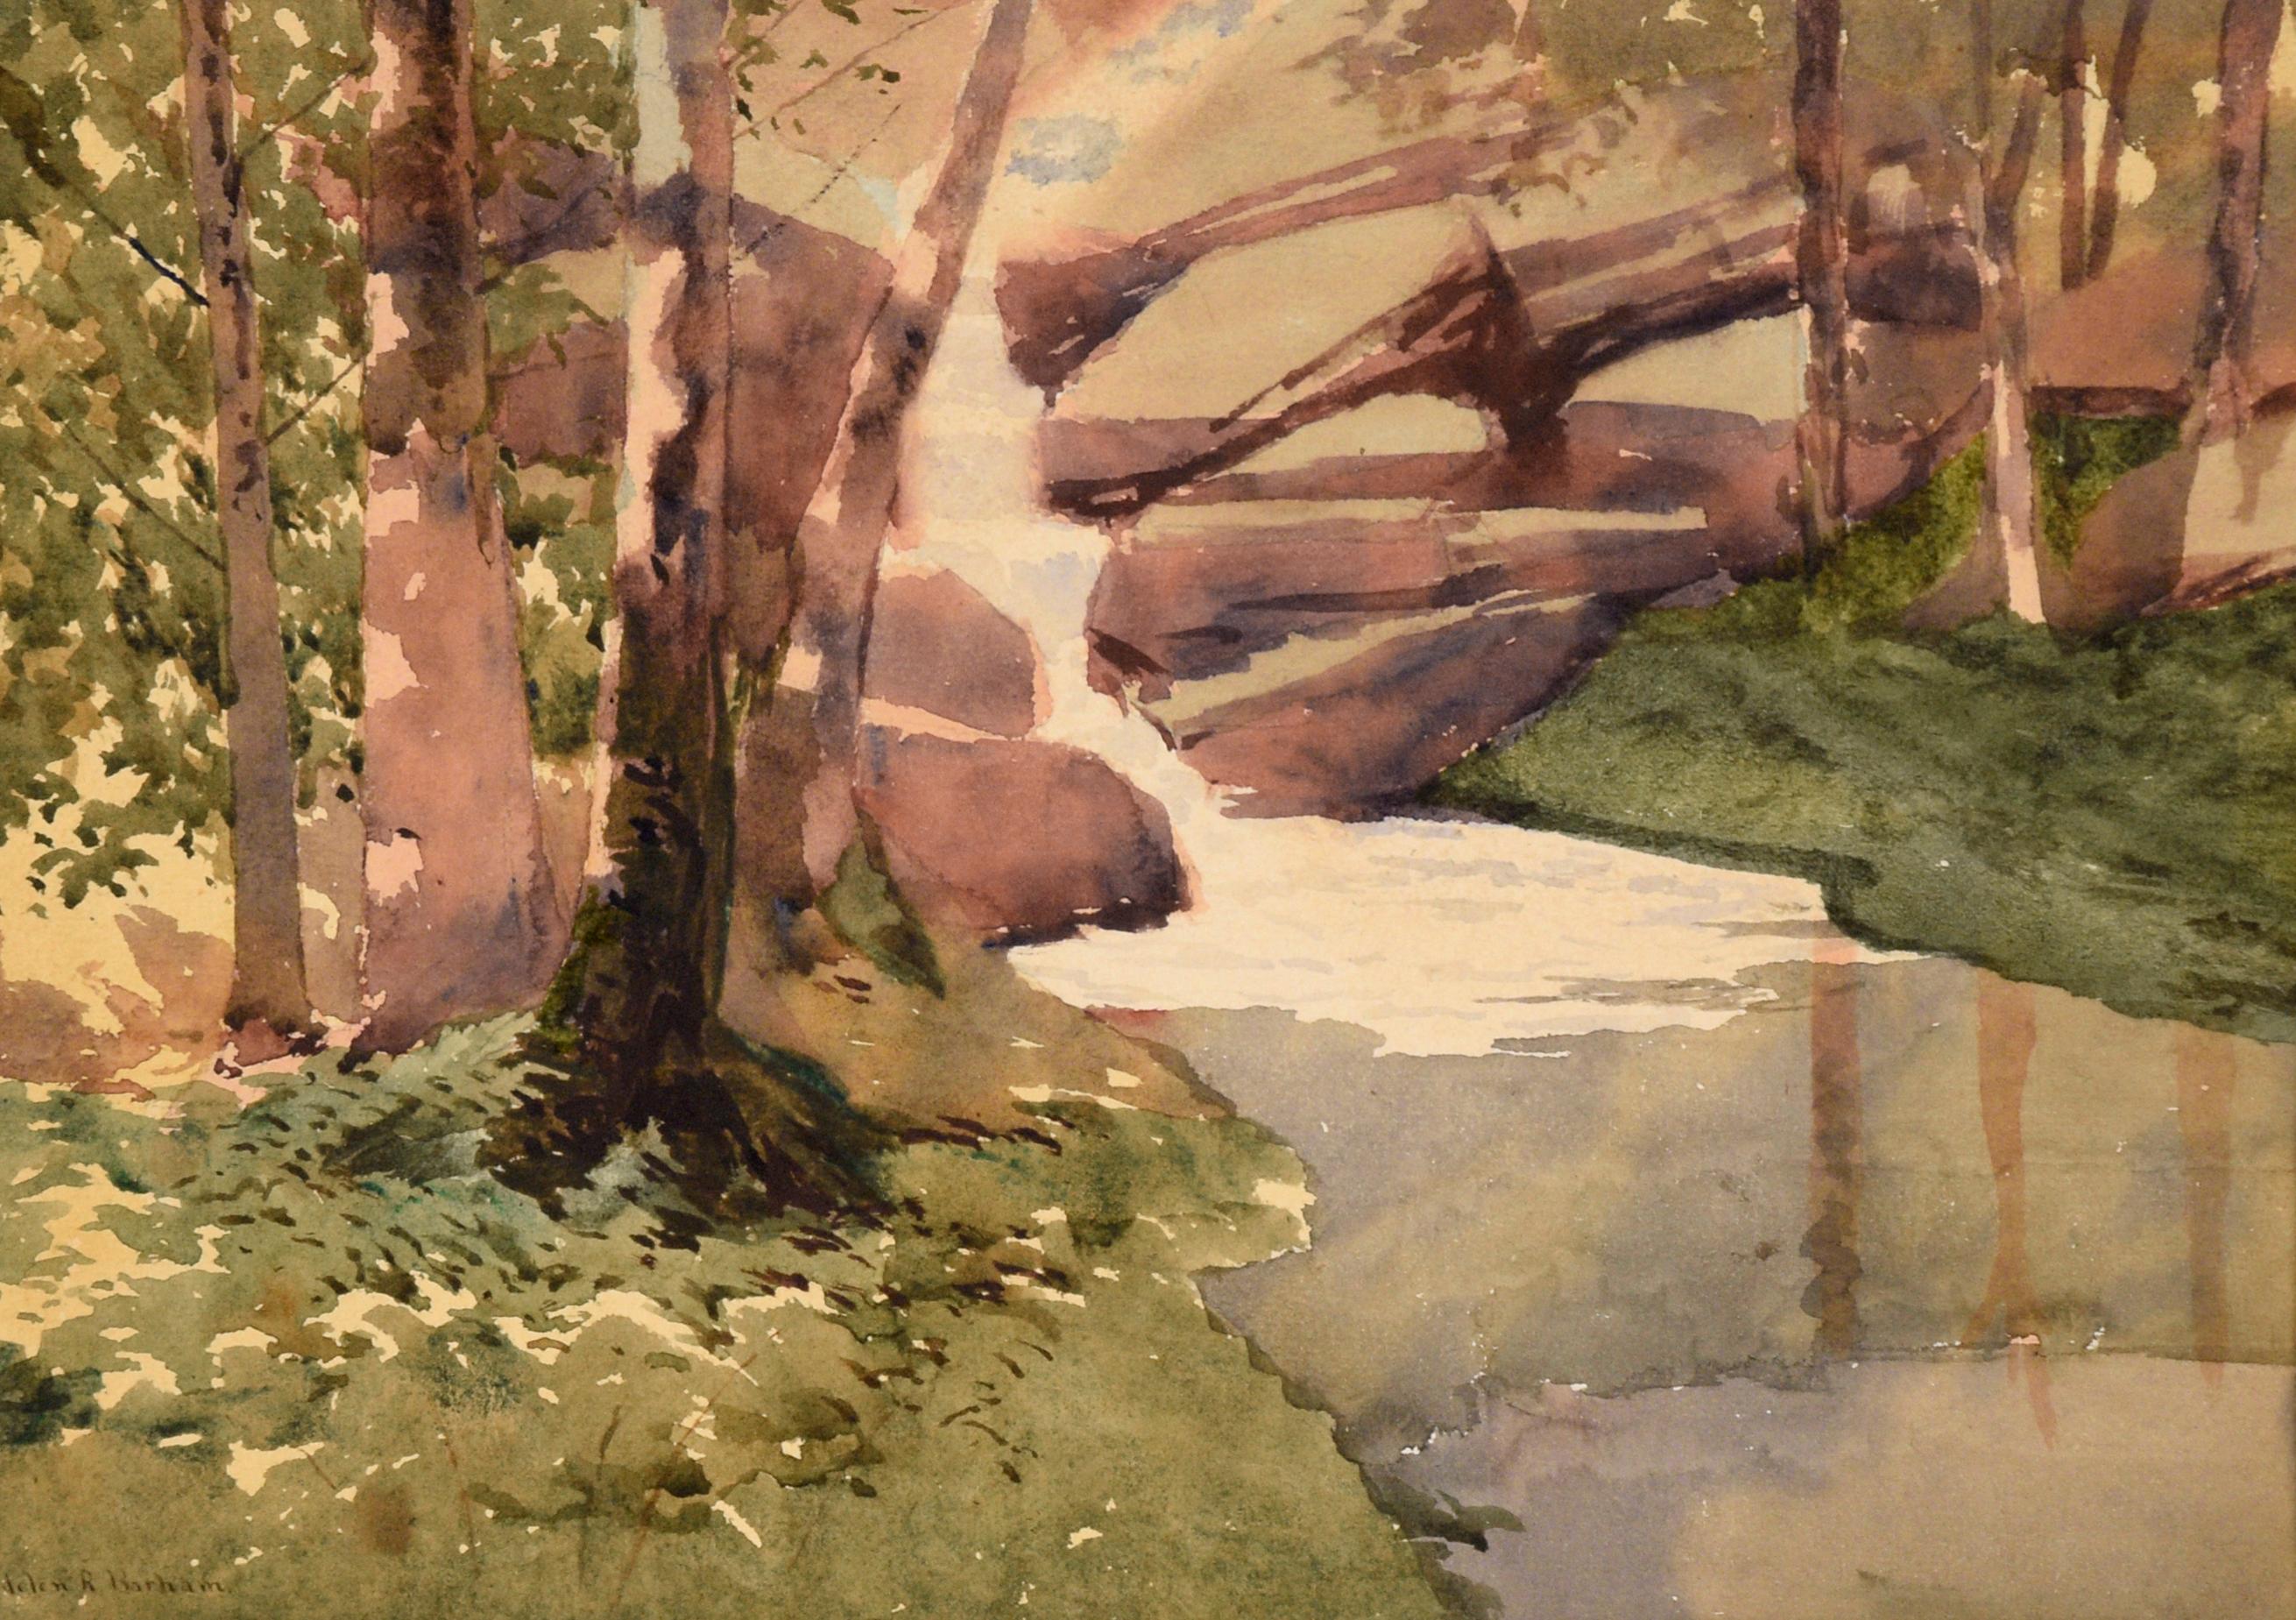 Cascading Stream in the Woods - Watercolor Landscape on Paper - Art by Helen R. Barham